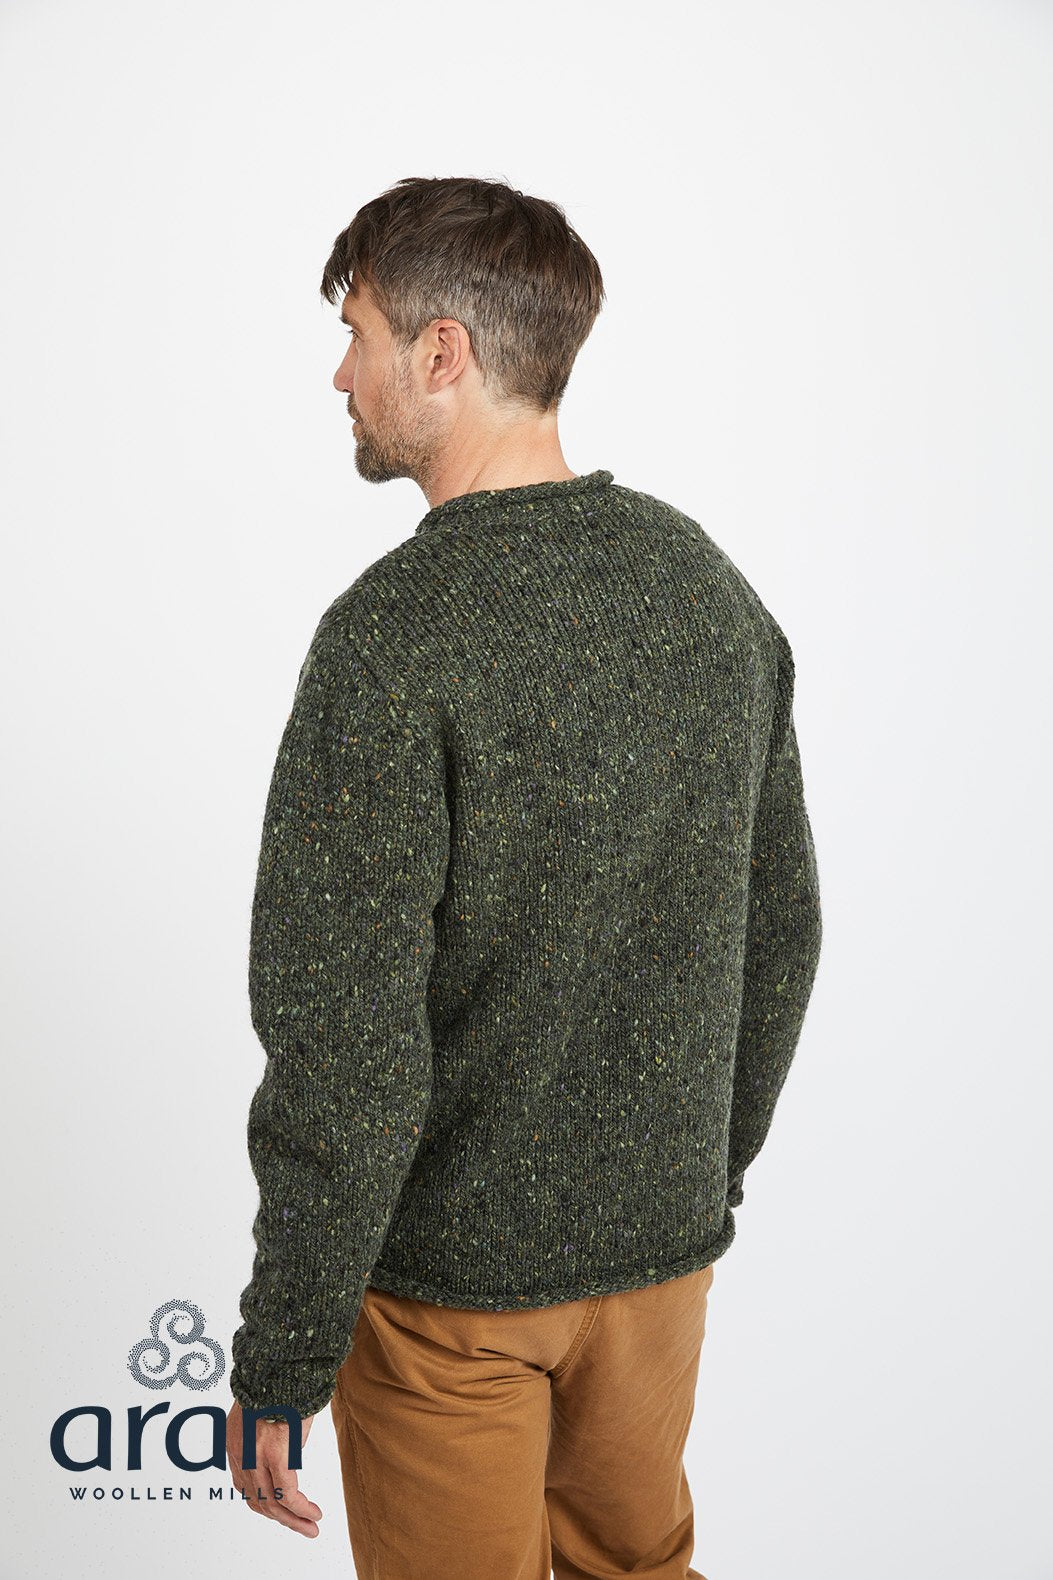 Aran Donegal Tweed Green Rolled  Neck Sweater